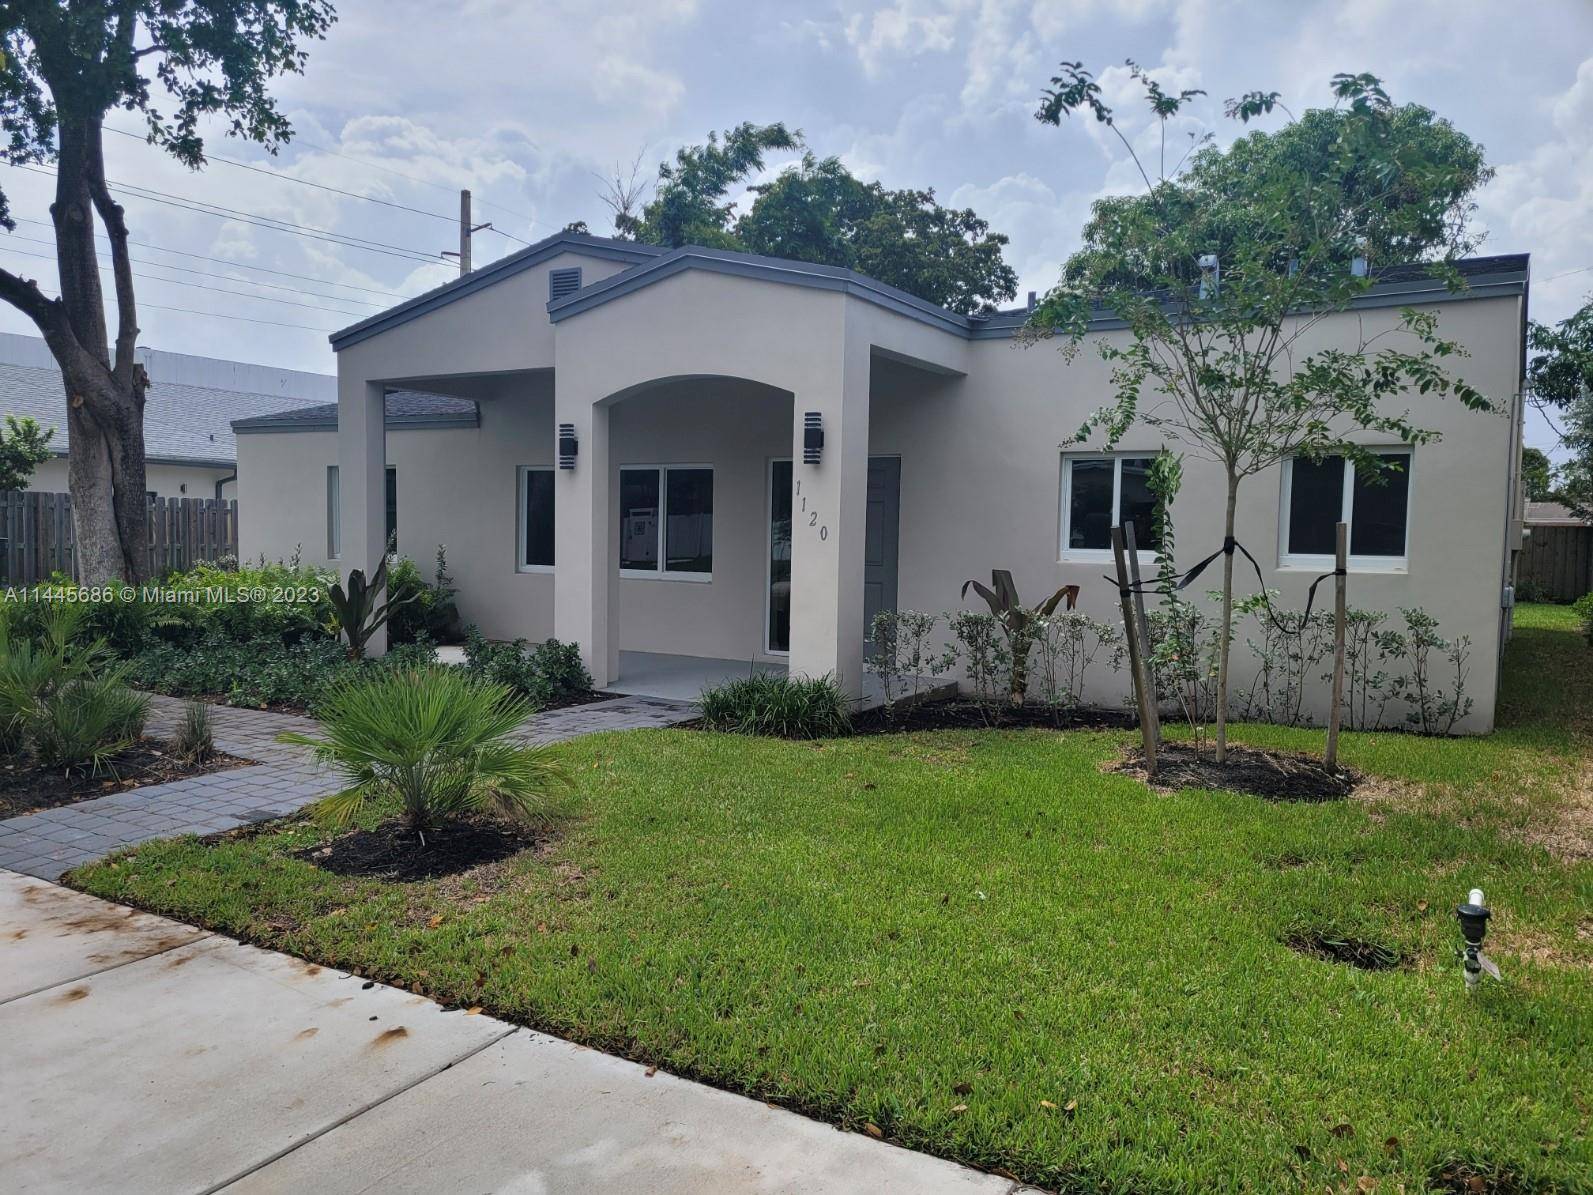 REDUCED 50 k.... Move right into this spacious 3 br 2 bath split and open 1550 sq ft of liv floorplan.